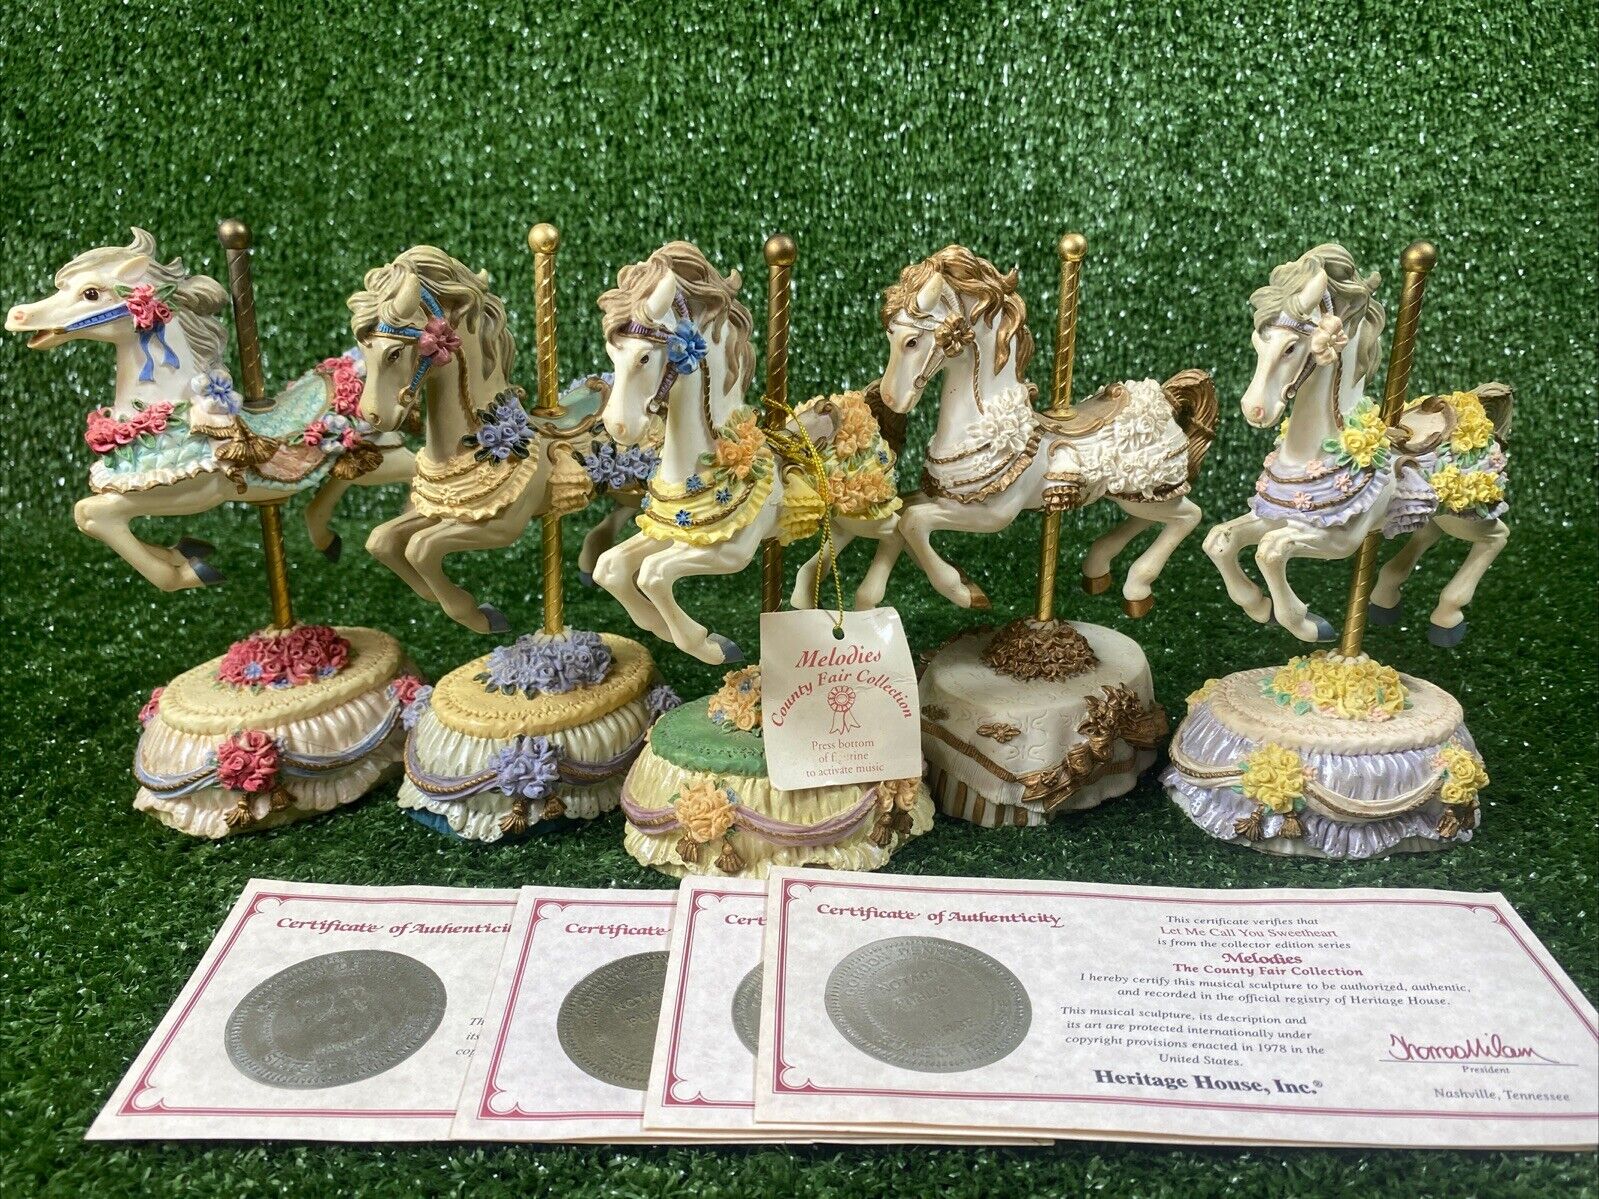 Heritage House Carousel Horse Country Fair Collection Lot of 5 Ex-Condition,